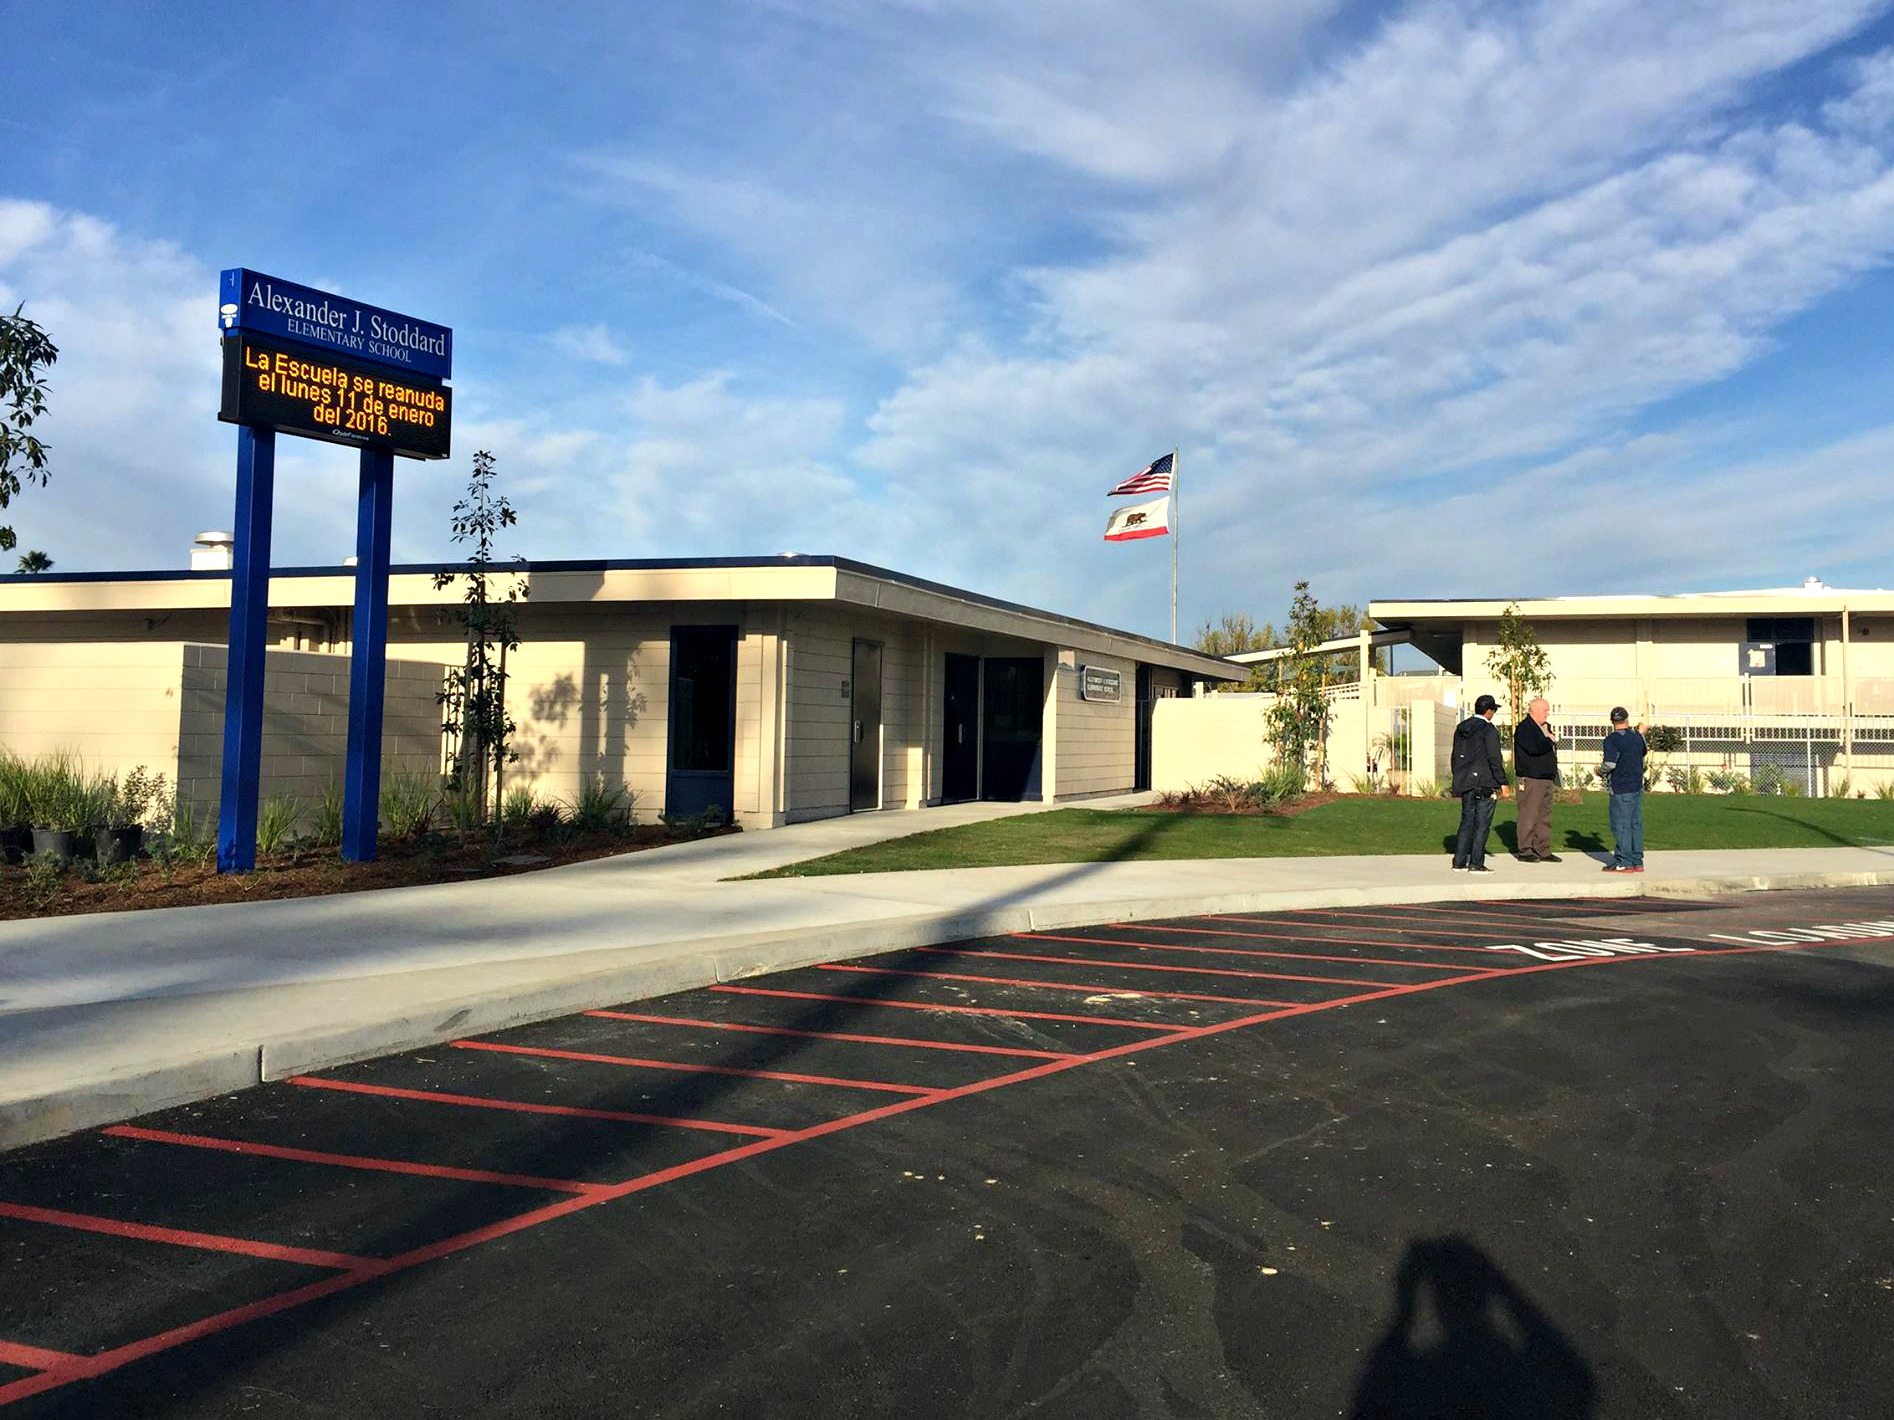 An image of Stoddard Elementary School in the Anaheim Elementary School District